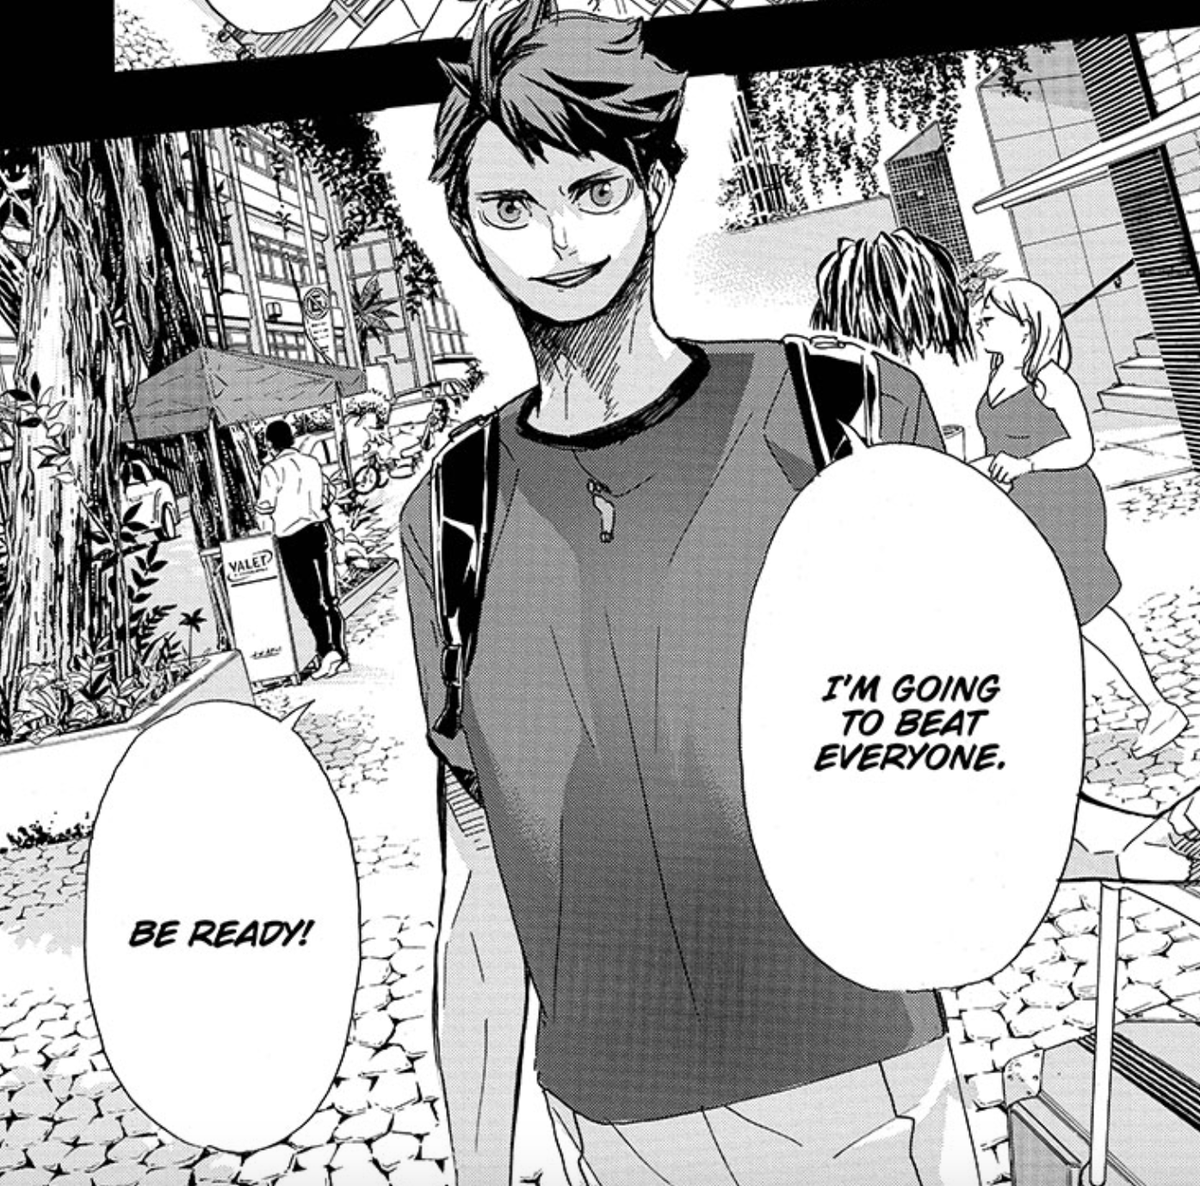 Finally, if offered a chance to a) play in his idol’s team, b) play in a team ranking HIGHER than Japan's 𝙝𝙚𝙡𝙡𝙤, c) beat the shit out of everyone he wanted to OFFICIALLY, like he wanted to do with Tobio back in high school, why the hell he should even pass up on it?